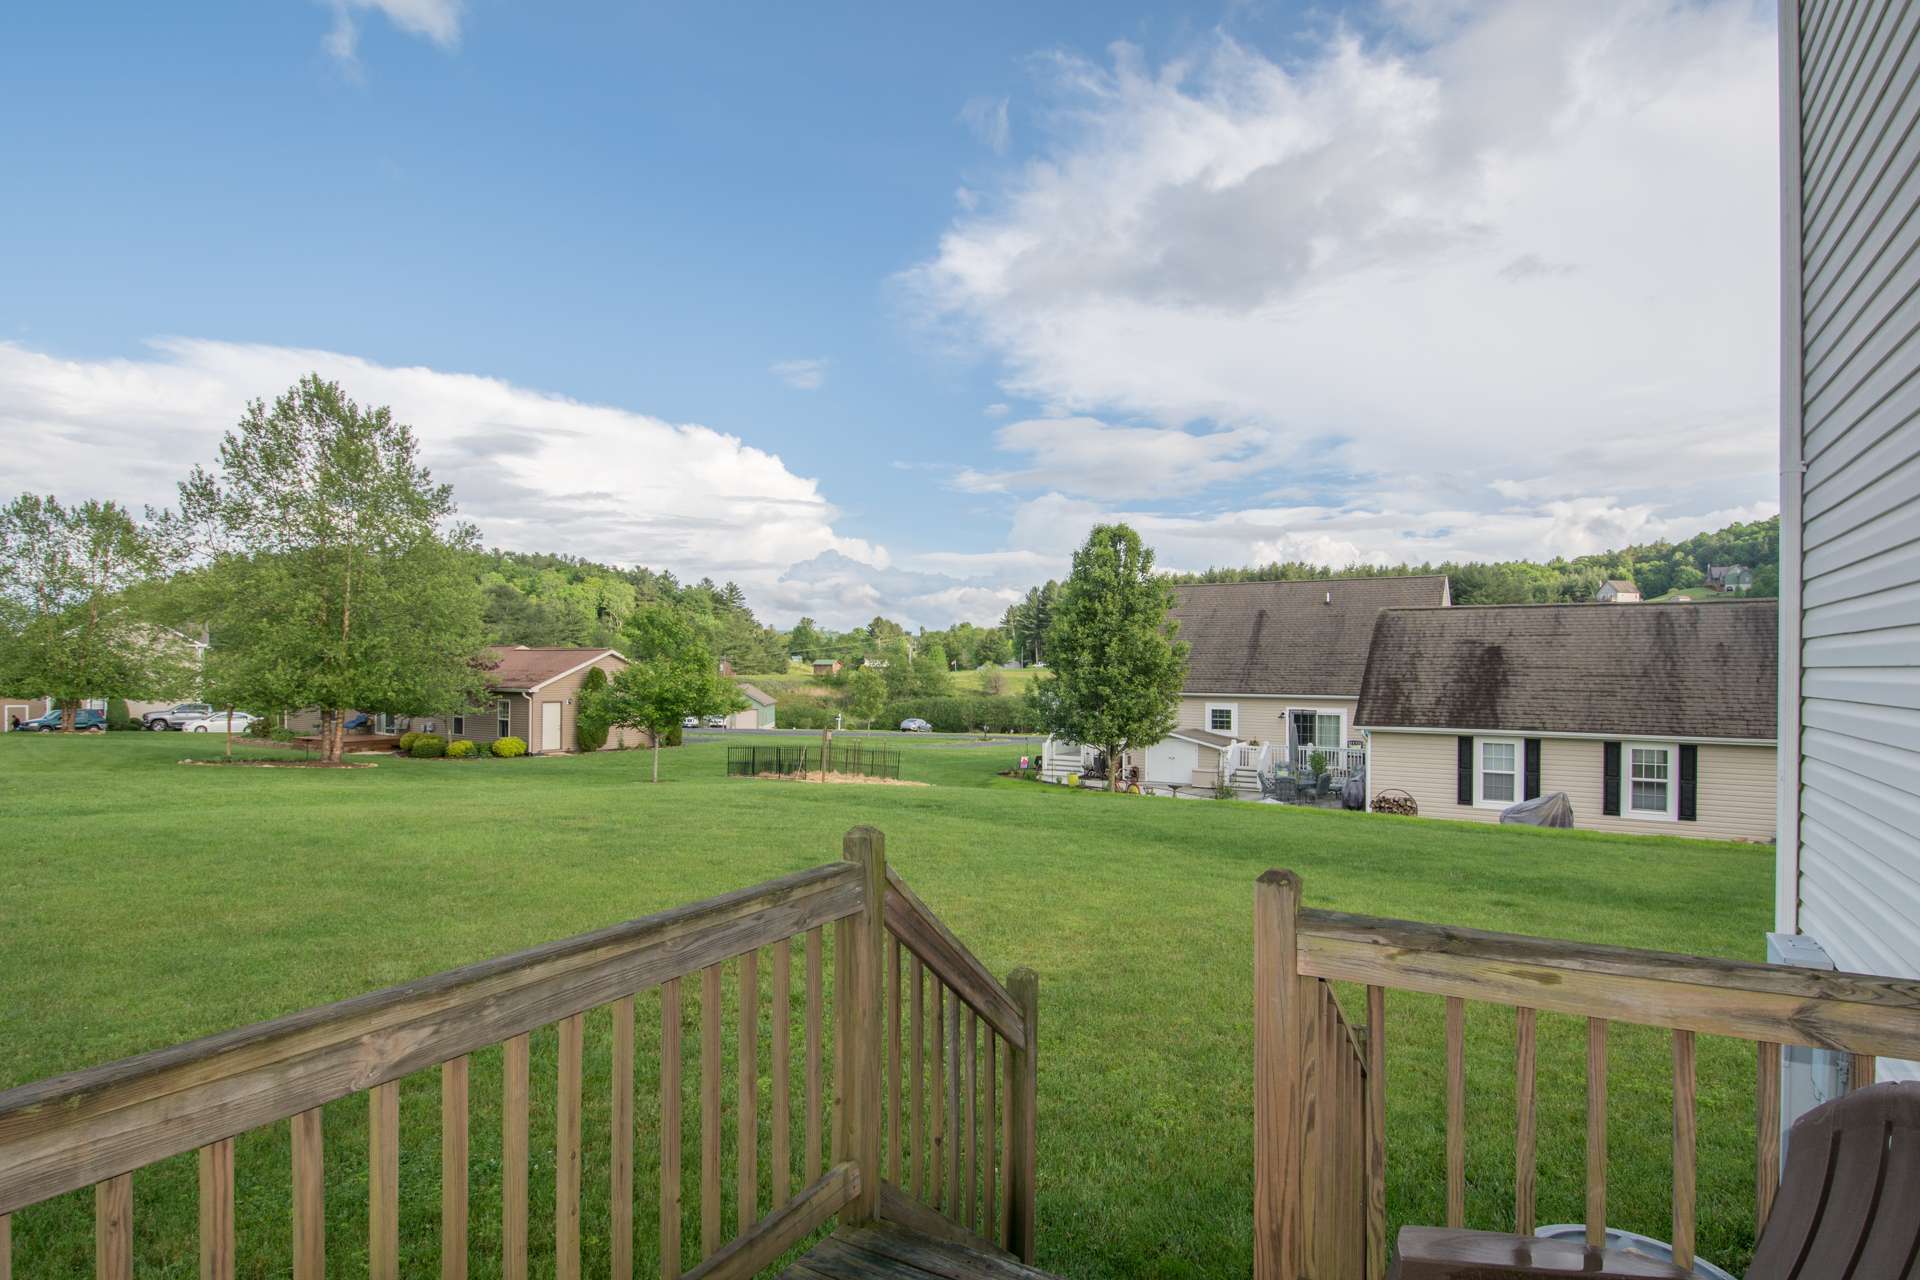 The back yard offers plenty of room for play and landscaping projects.